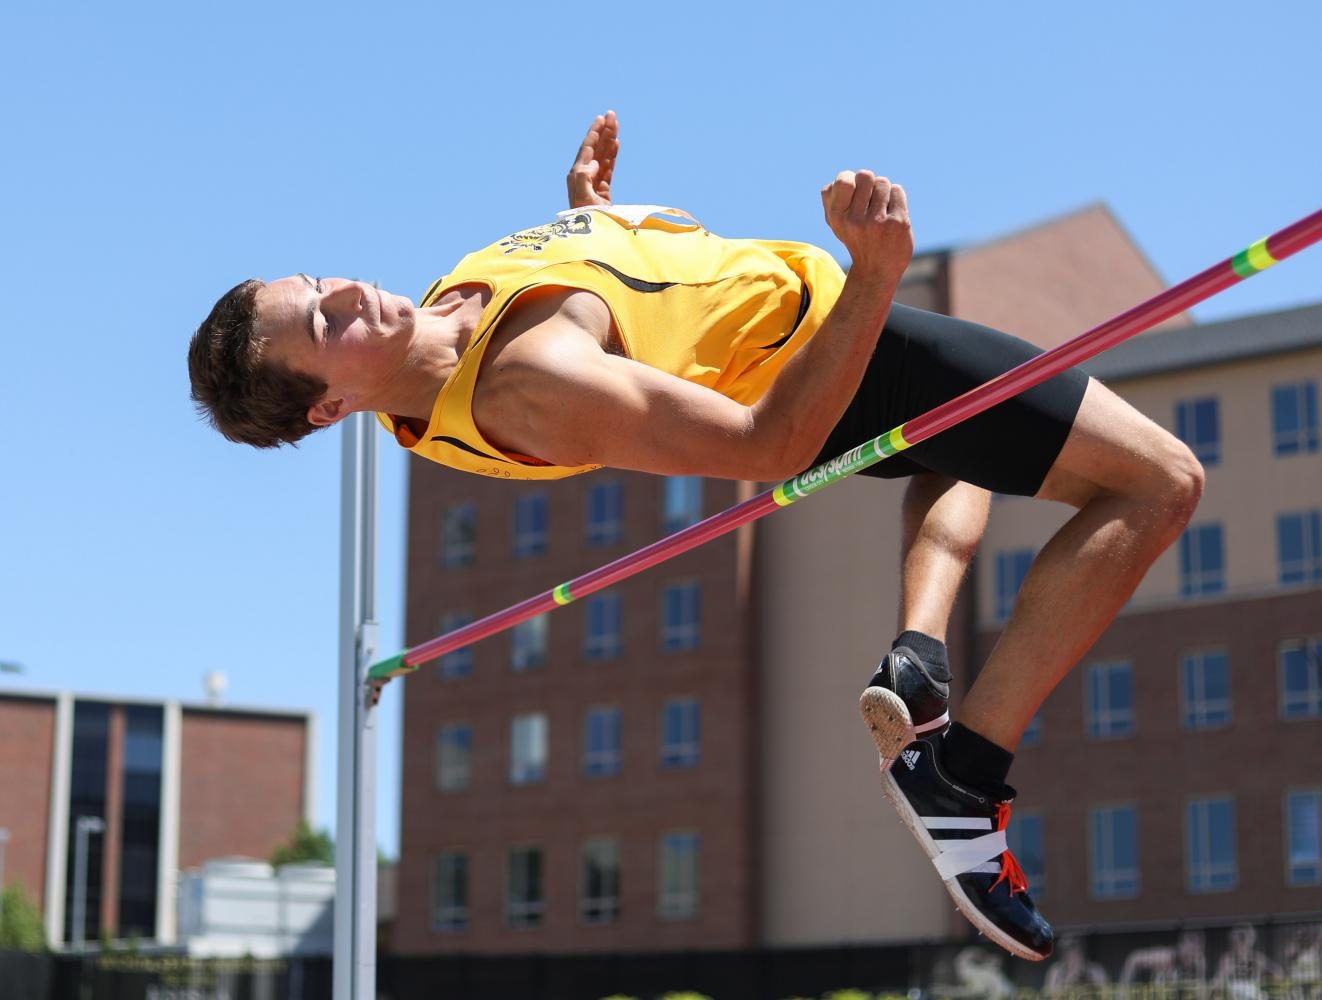 Ben Johnson high jumps during the decathlon Friday at the Missouri Valley Conference Outdoor Track and Field Championship. Johnson won the decathlon by a margin of over 400 points, scoring a total of 7053 points. (May 12, 2017)